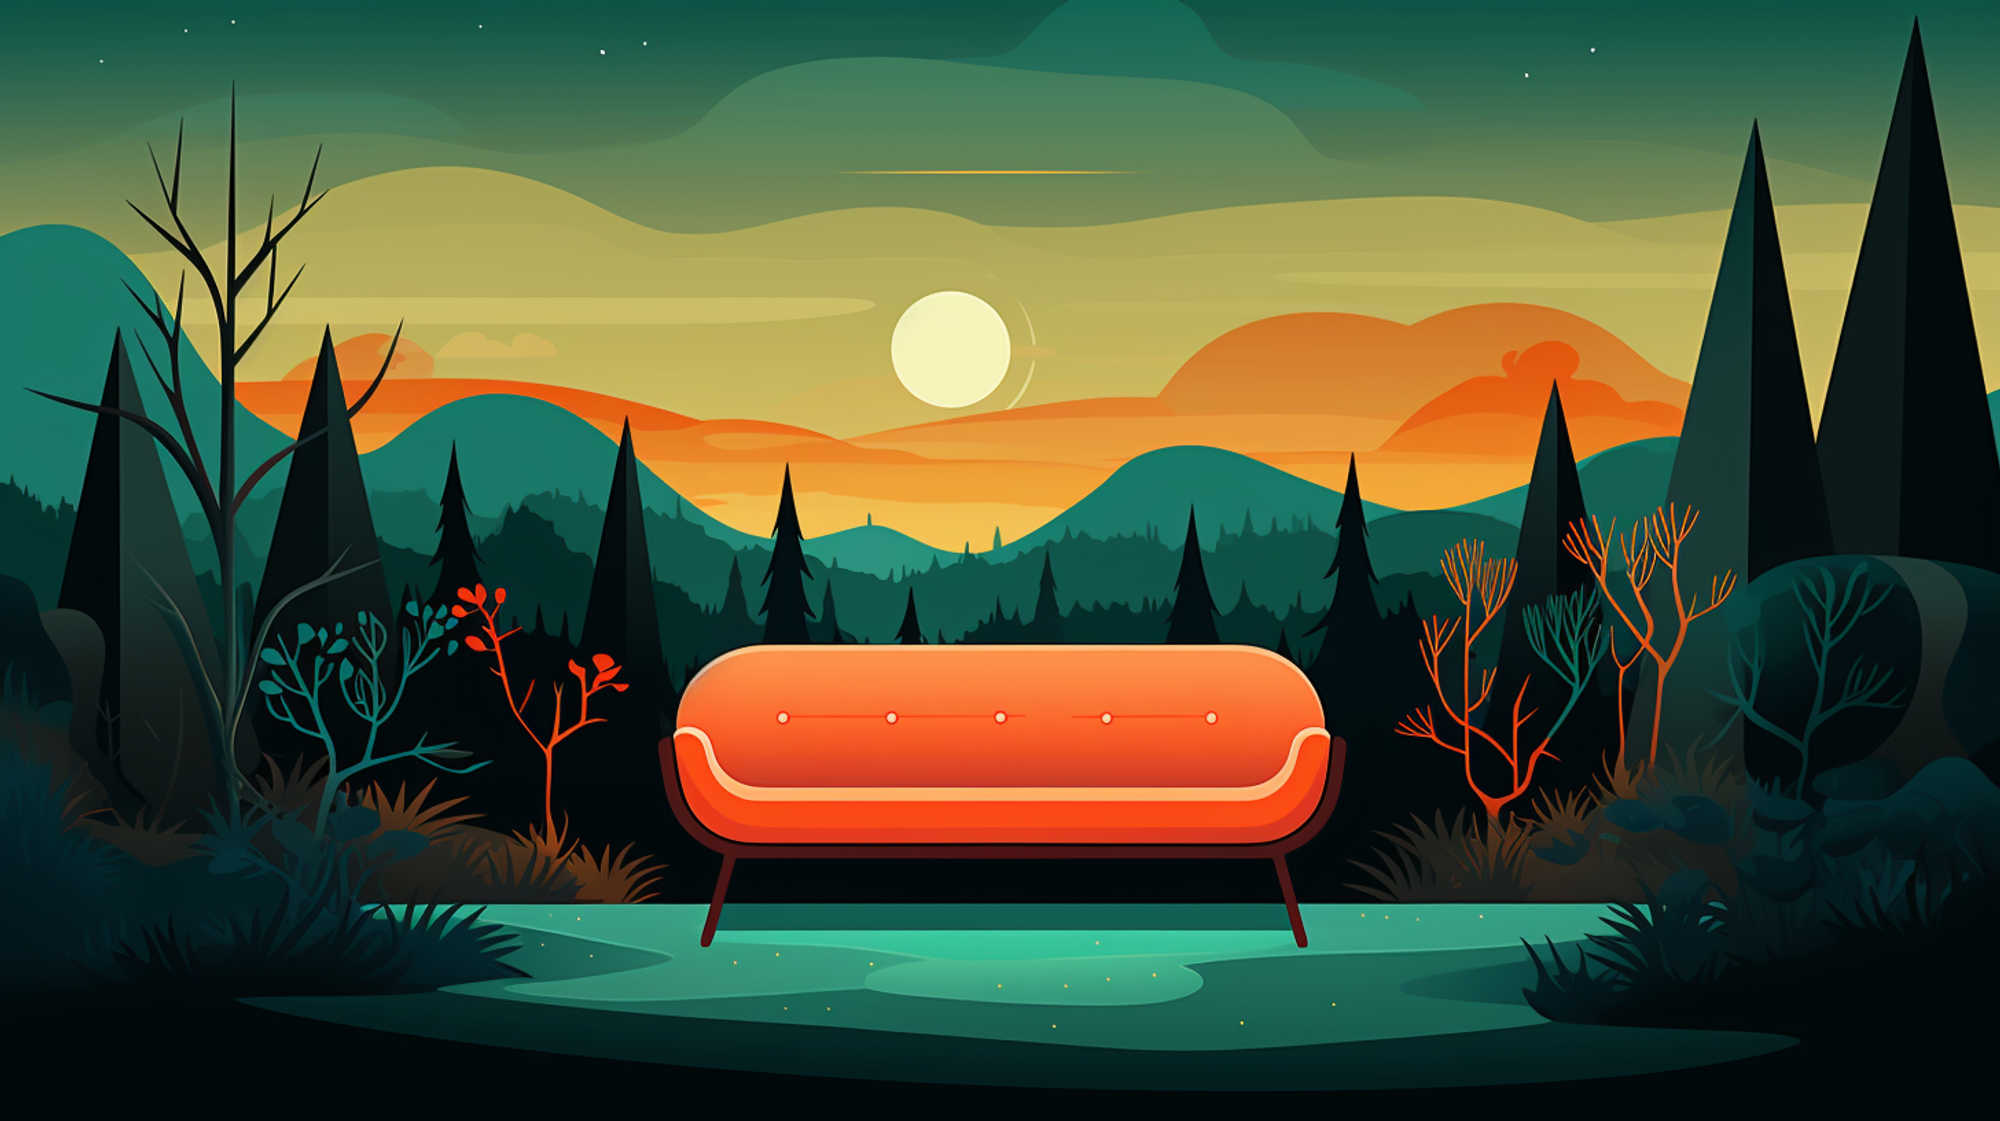 an illustration of the sunset in a forest, with a comfortable couch in the middle.